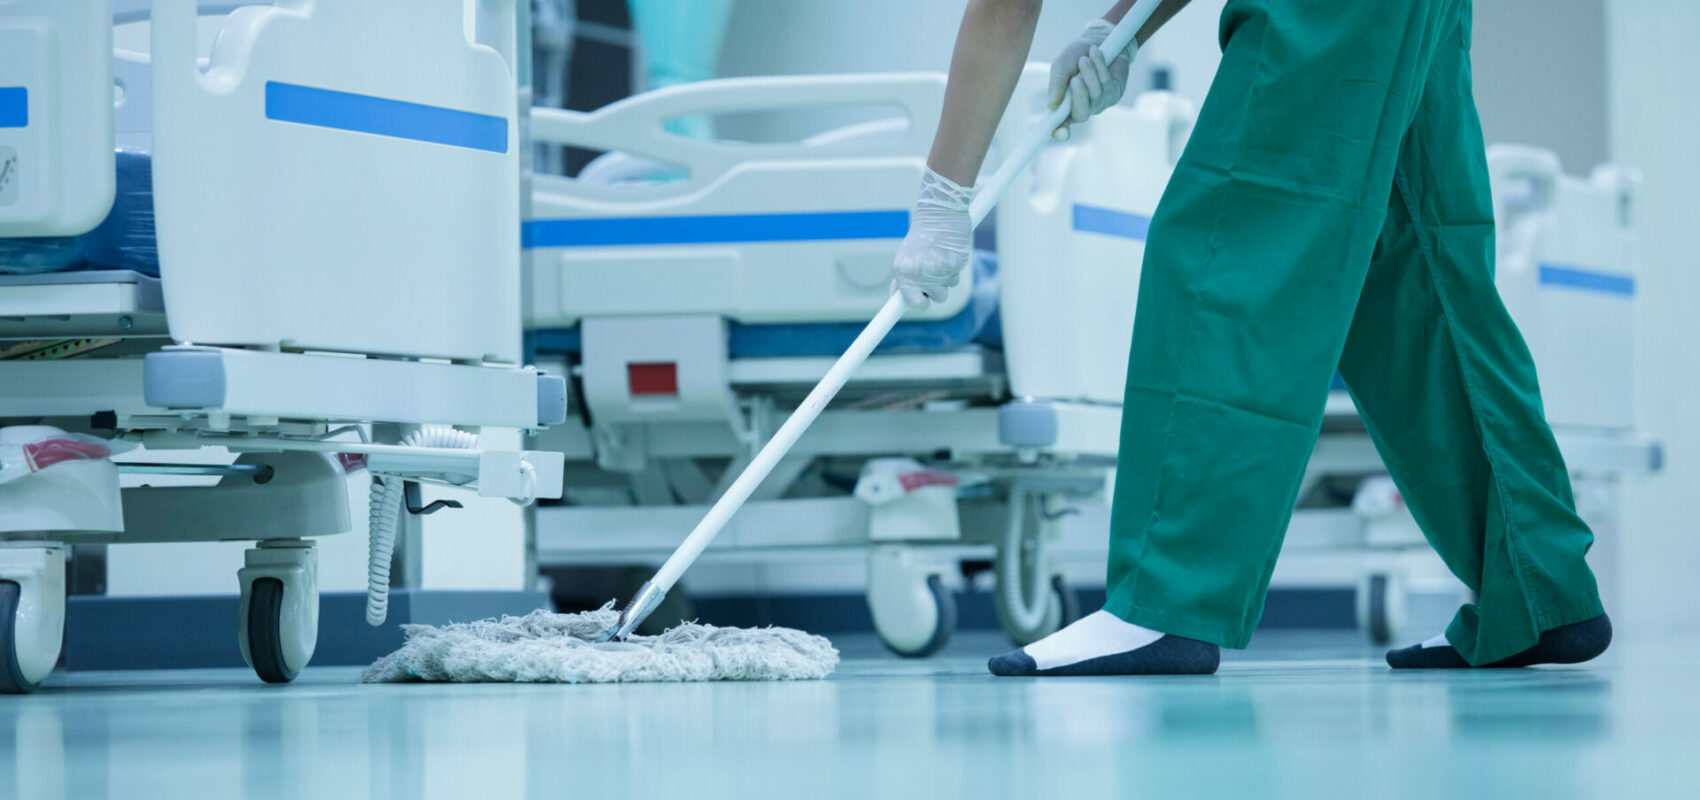 Cleaner,hospital,Cleaning,cleaner,With,Mop,And,Uniform,Cleaning,Hall,Floor,cleaning,Floor